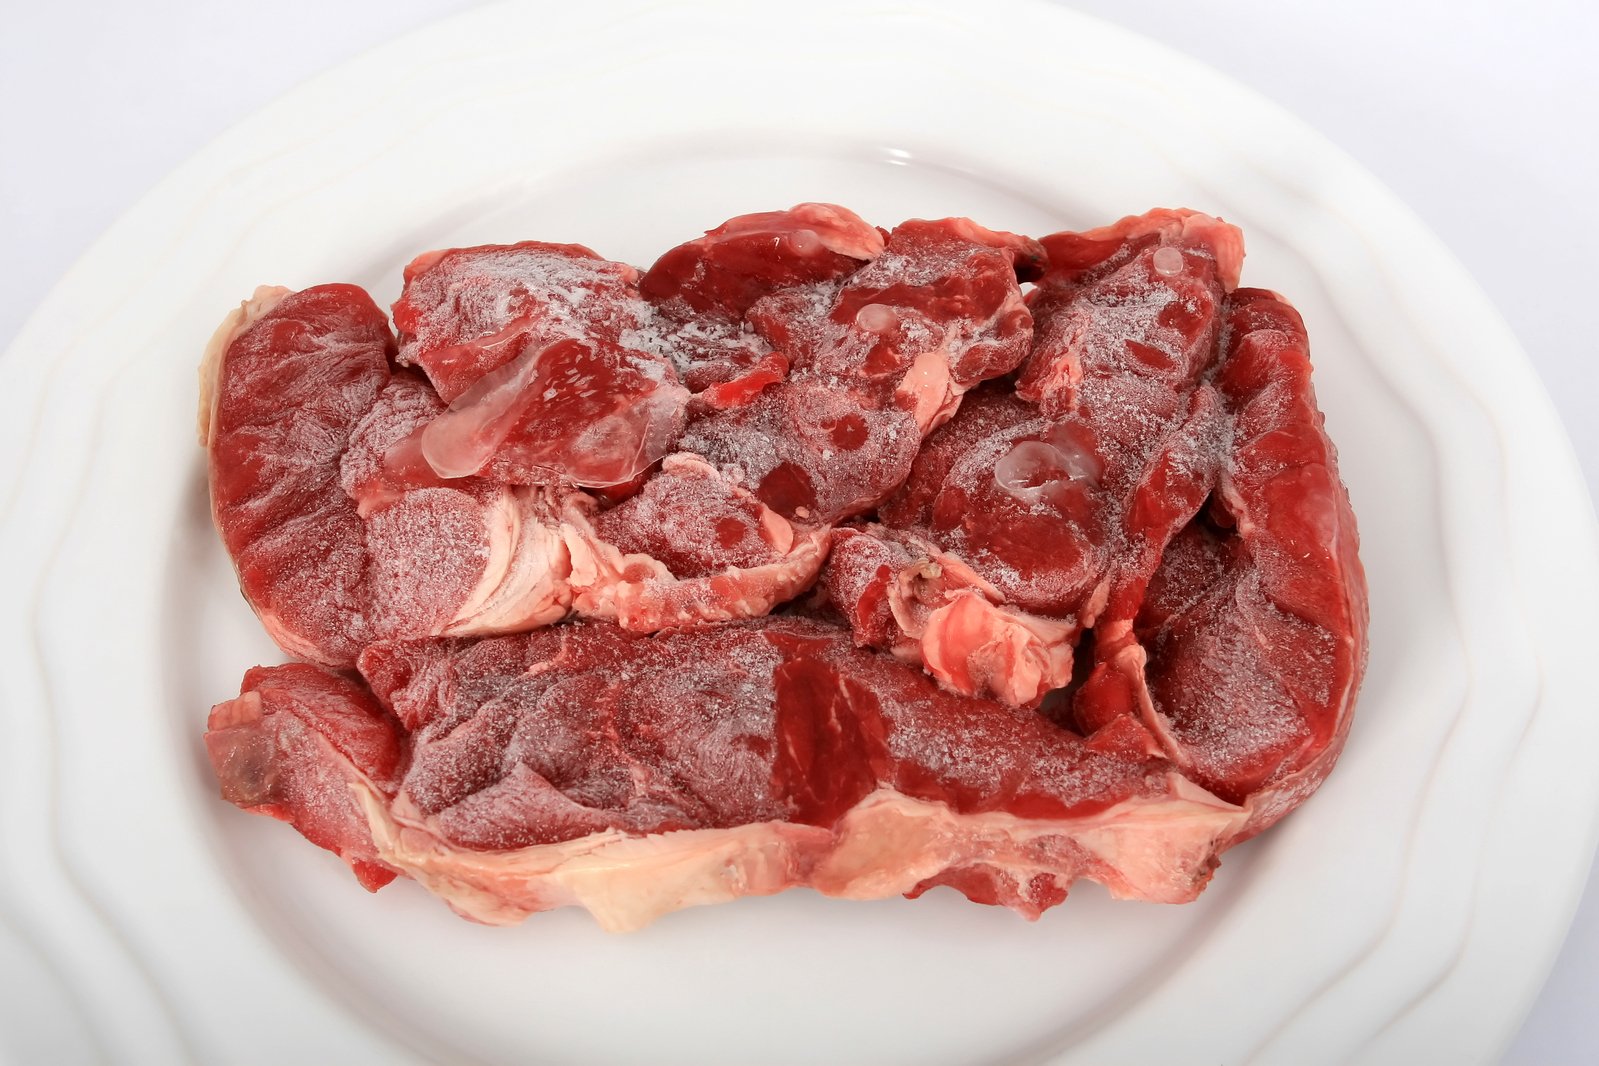 red meat sliced into small cubes on a plate